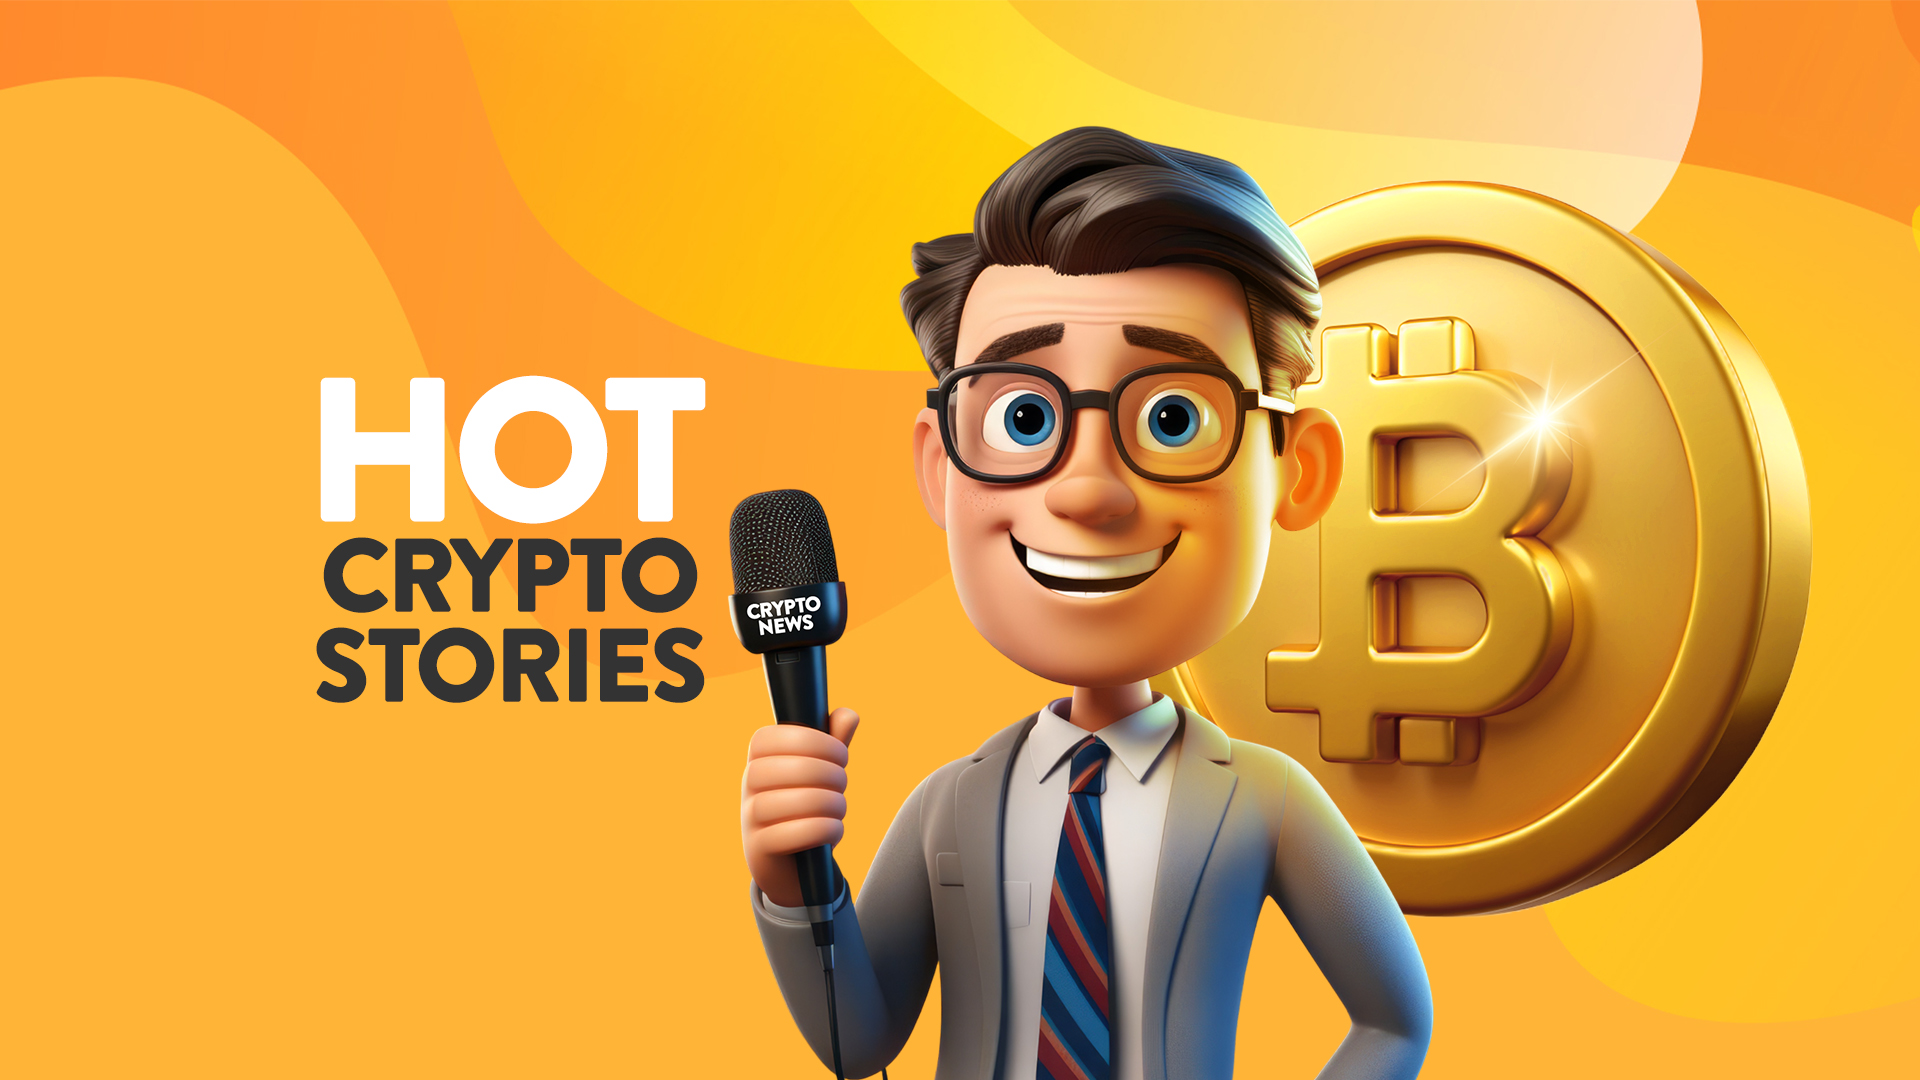 A yellow-orange background has a man in a suit holding a microphone, and to his left the text says ‘Hot Crypto Stories’, and a gold Bitcoin is to his right.